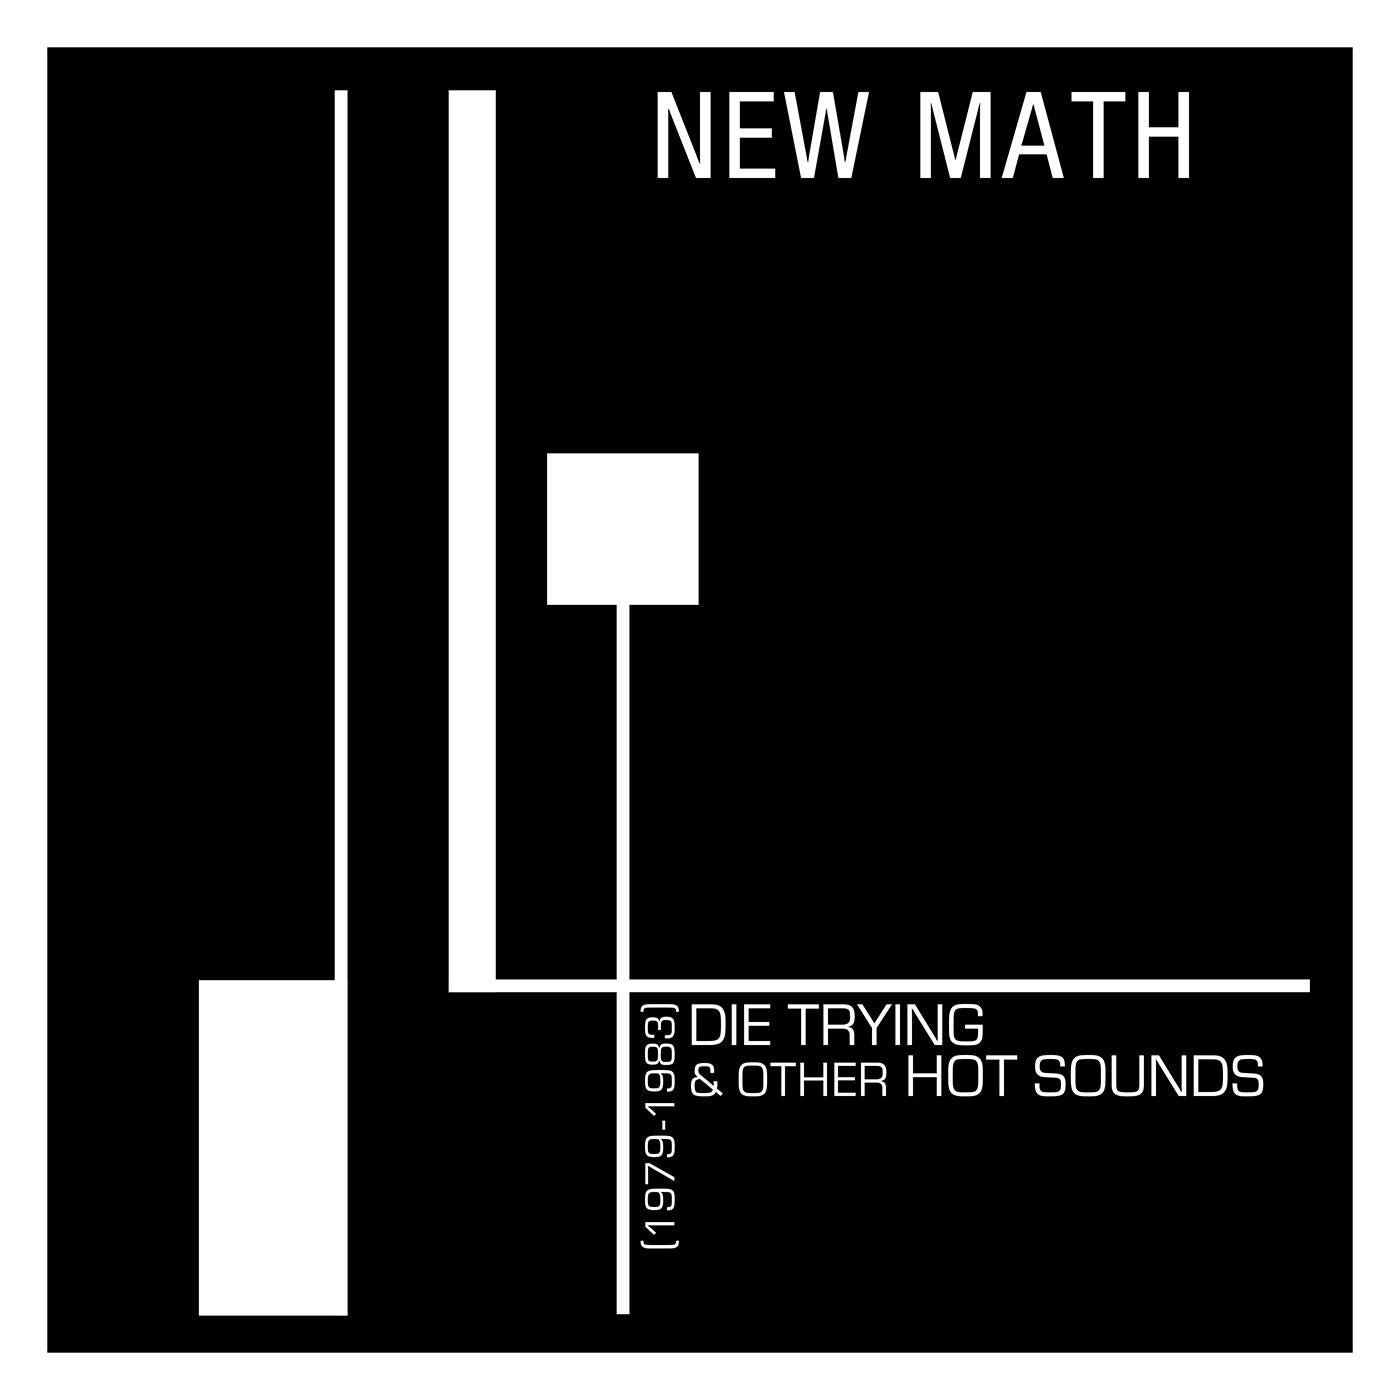 New Math – Die Trying & Other Hot Sounds (1979-1983) [CLEAR VINYL] - New LP